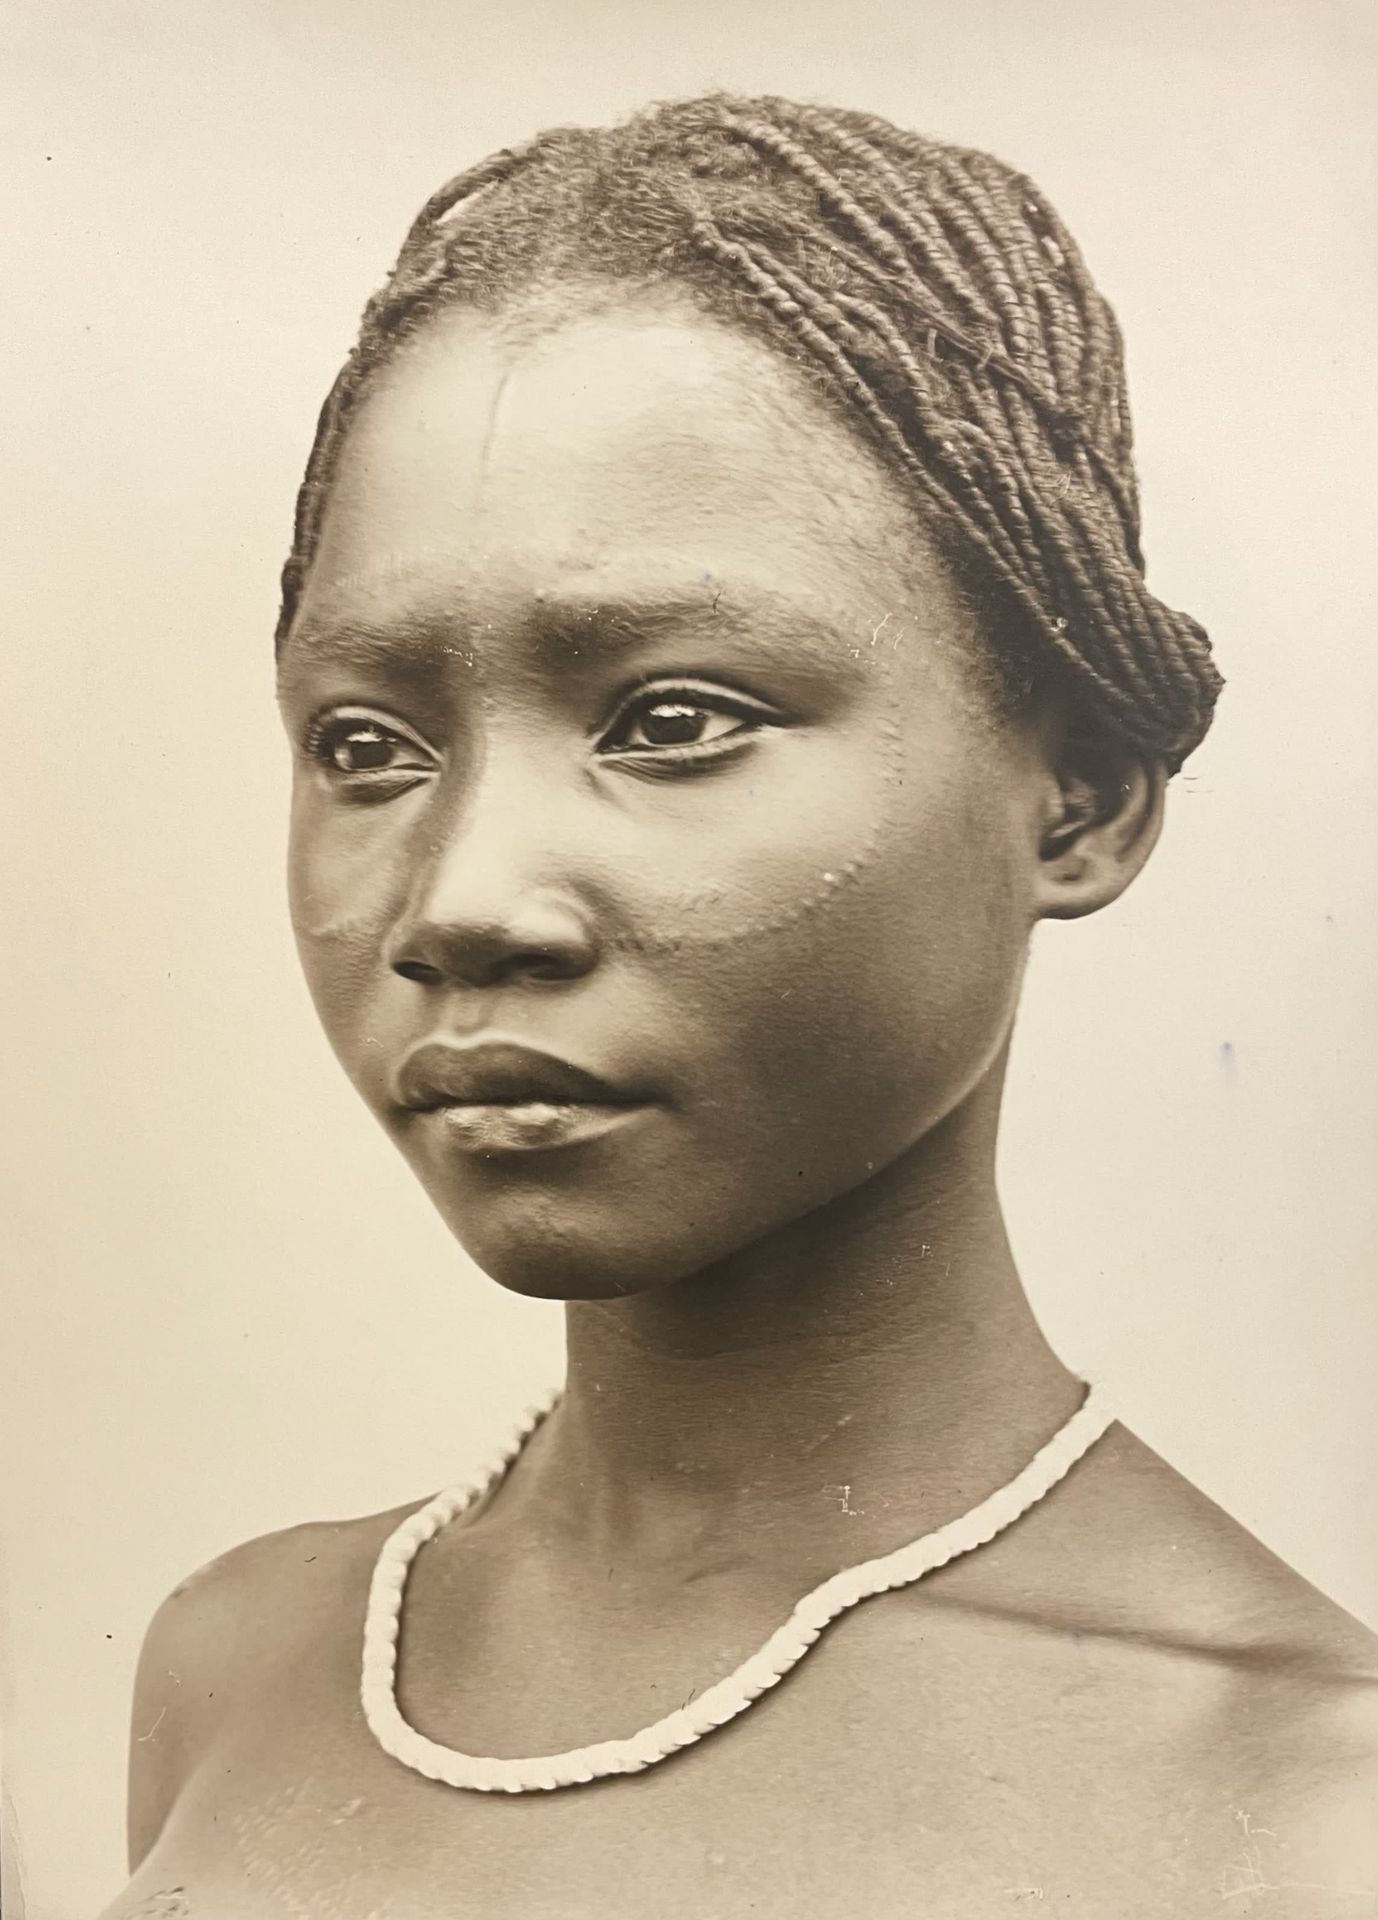 ANONYME. "African women". Meeting of 4 silver prints. Size : (4 x) 23 x 17 cm (f&hellip;